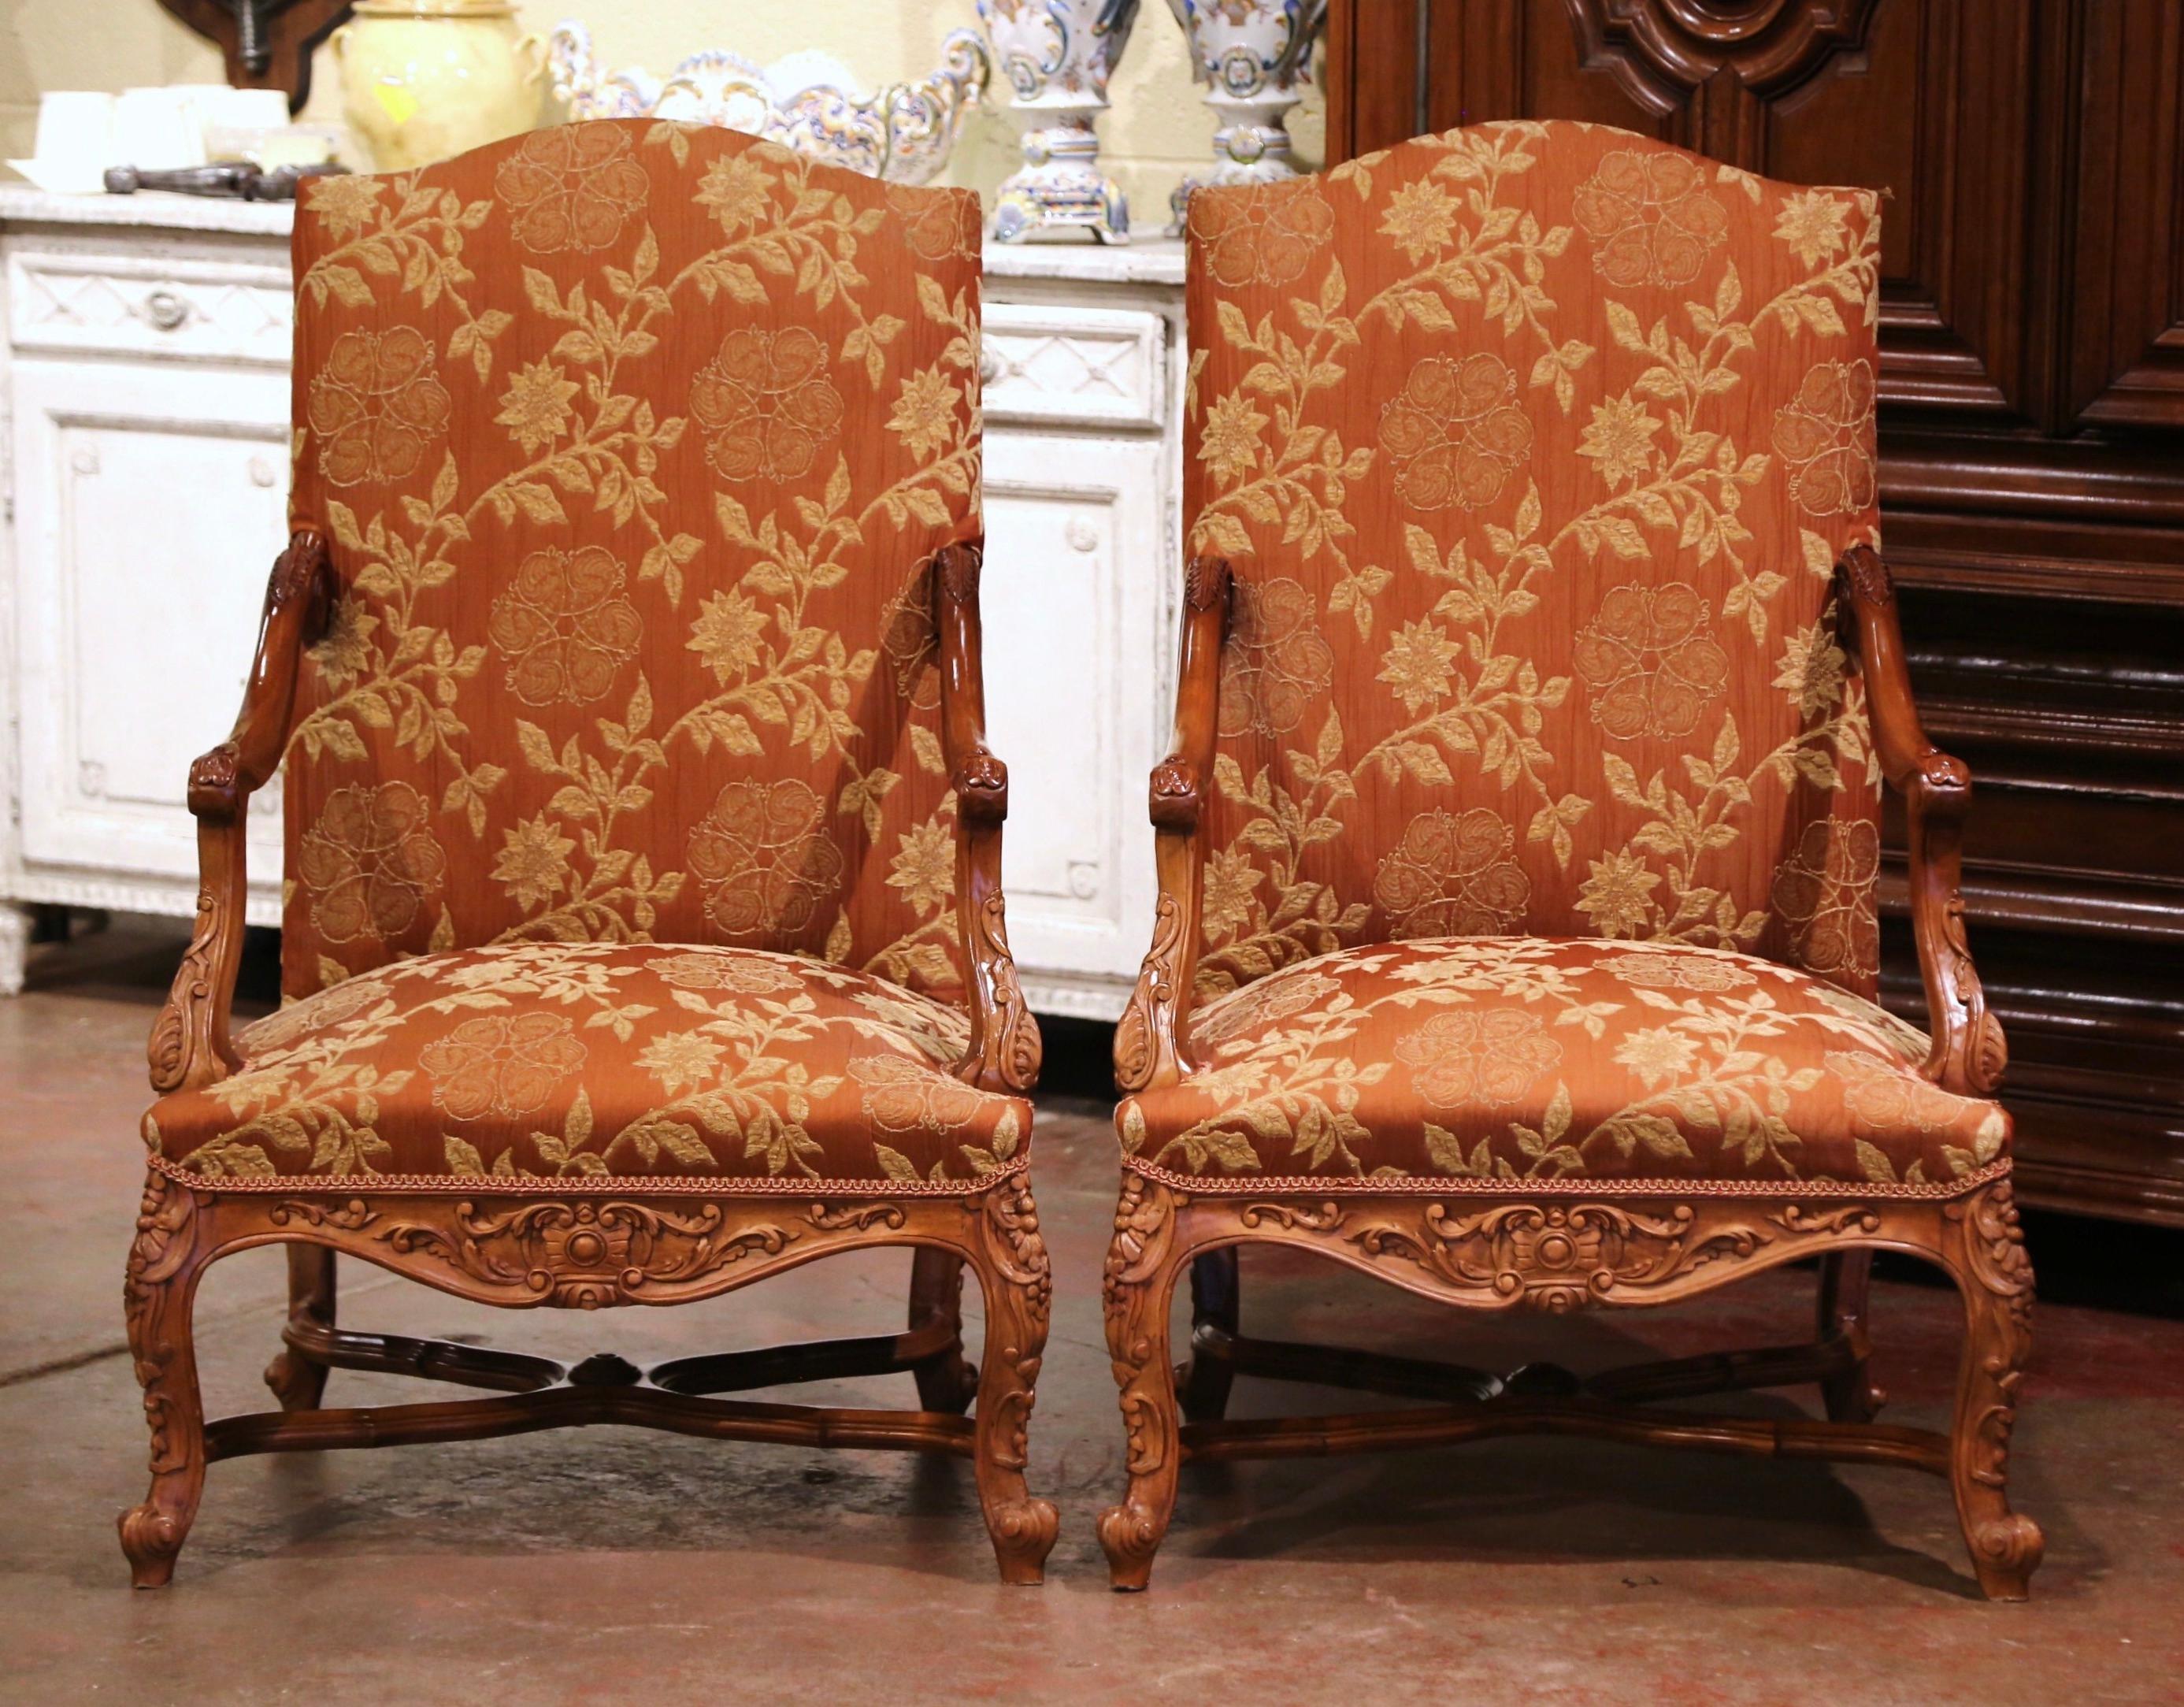 Crafted in Provence, France circa 1880, each comfortable fauteuil sits on cabriole legs decorated with acanthus leaves at the shoulder, and ending with escargot feet over an X-form stretcher. Both armchairs have a tall and arched back, a wide and